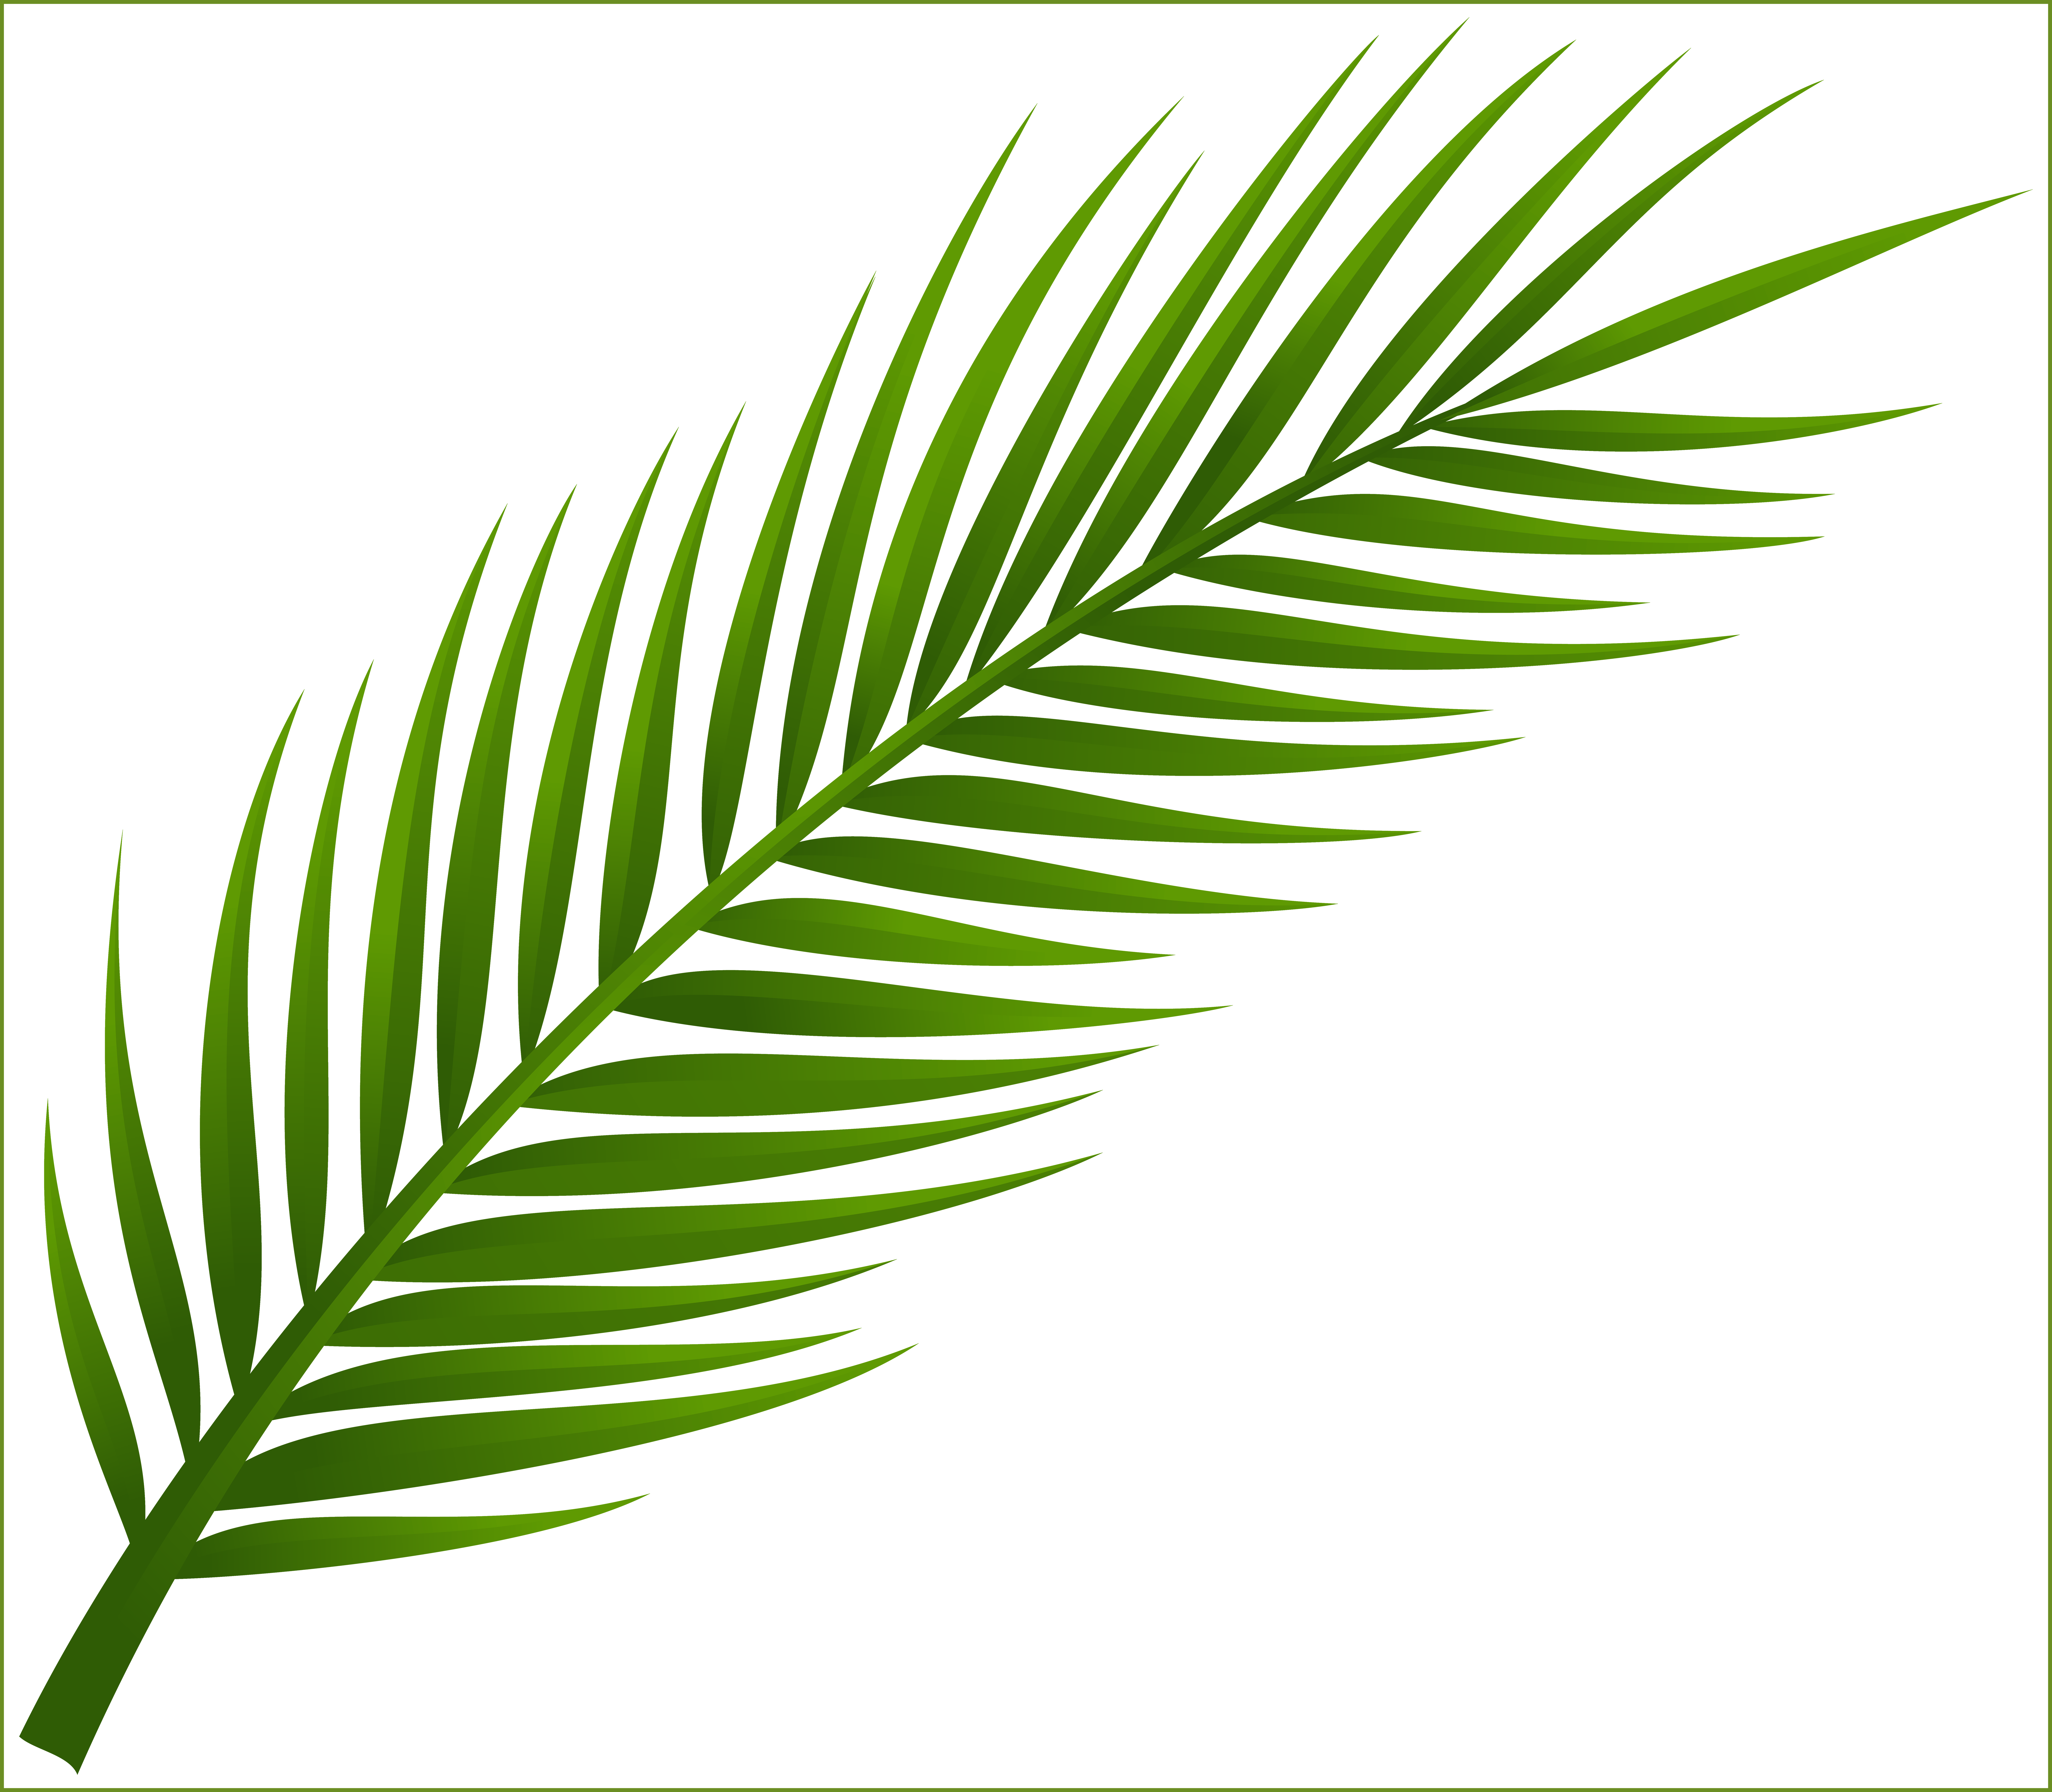 leaf clipart coconut tree